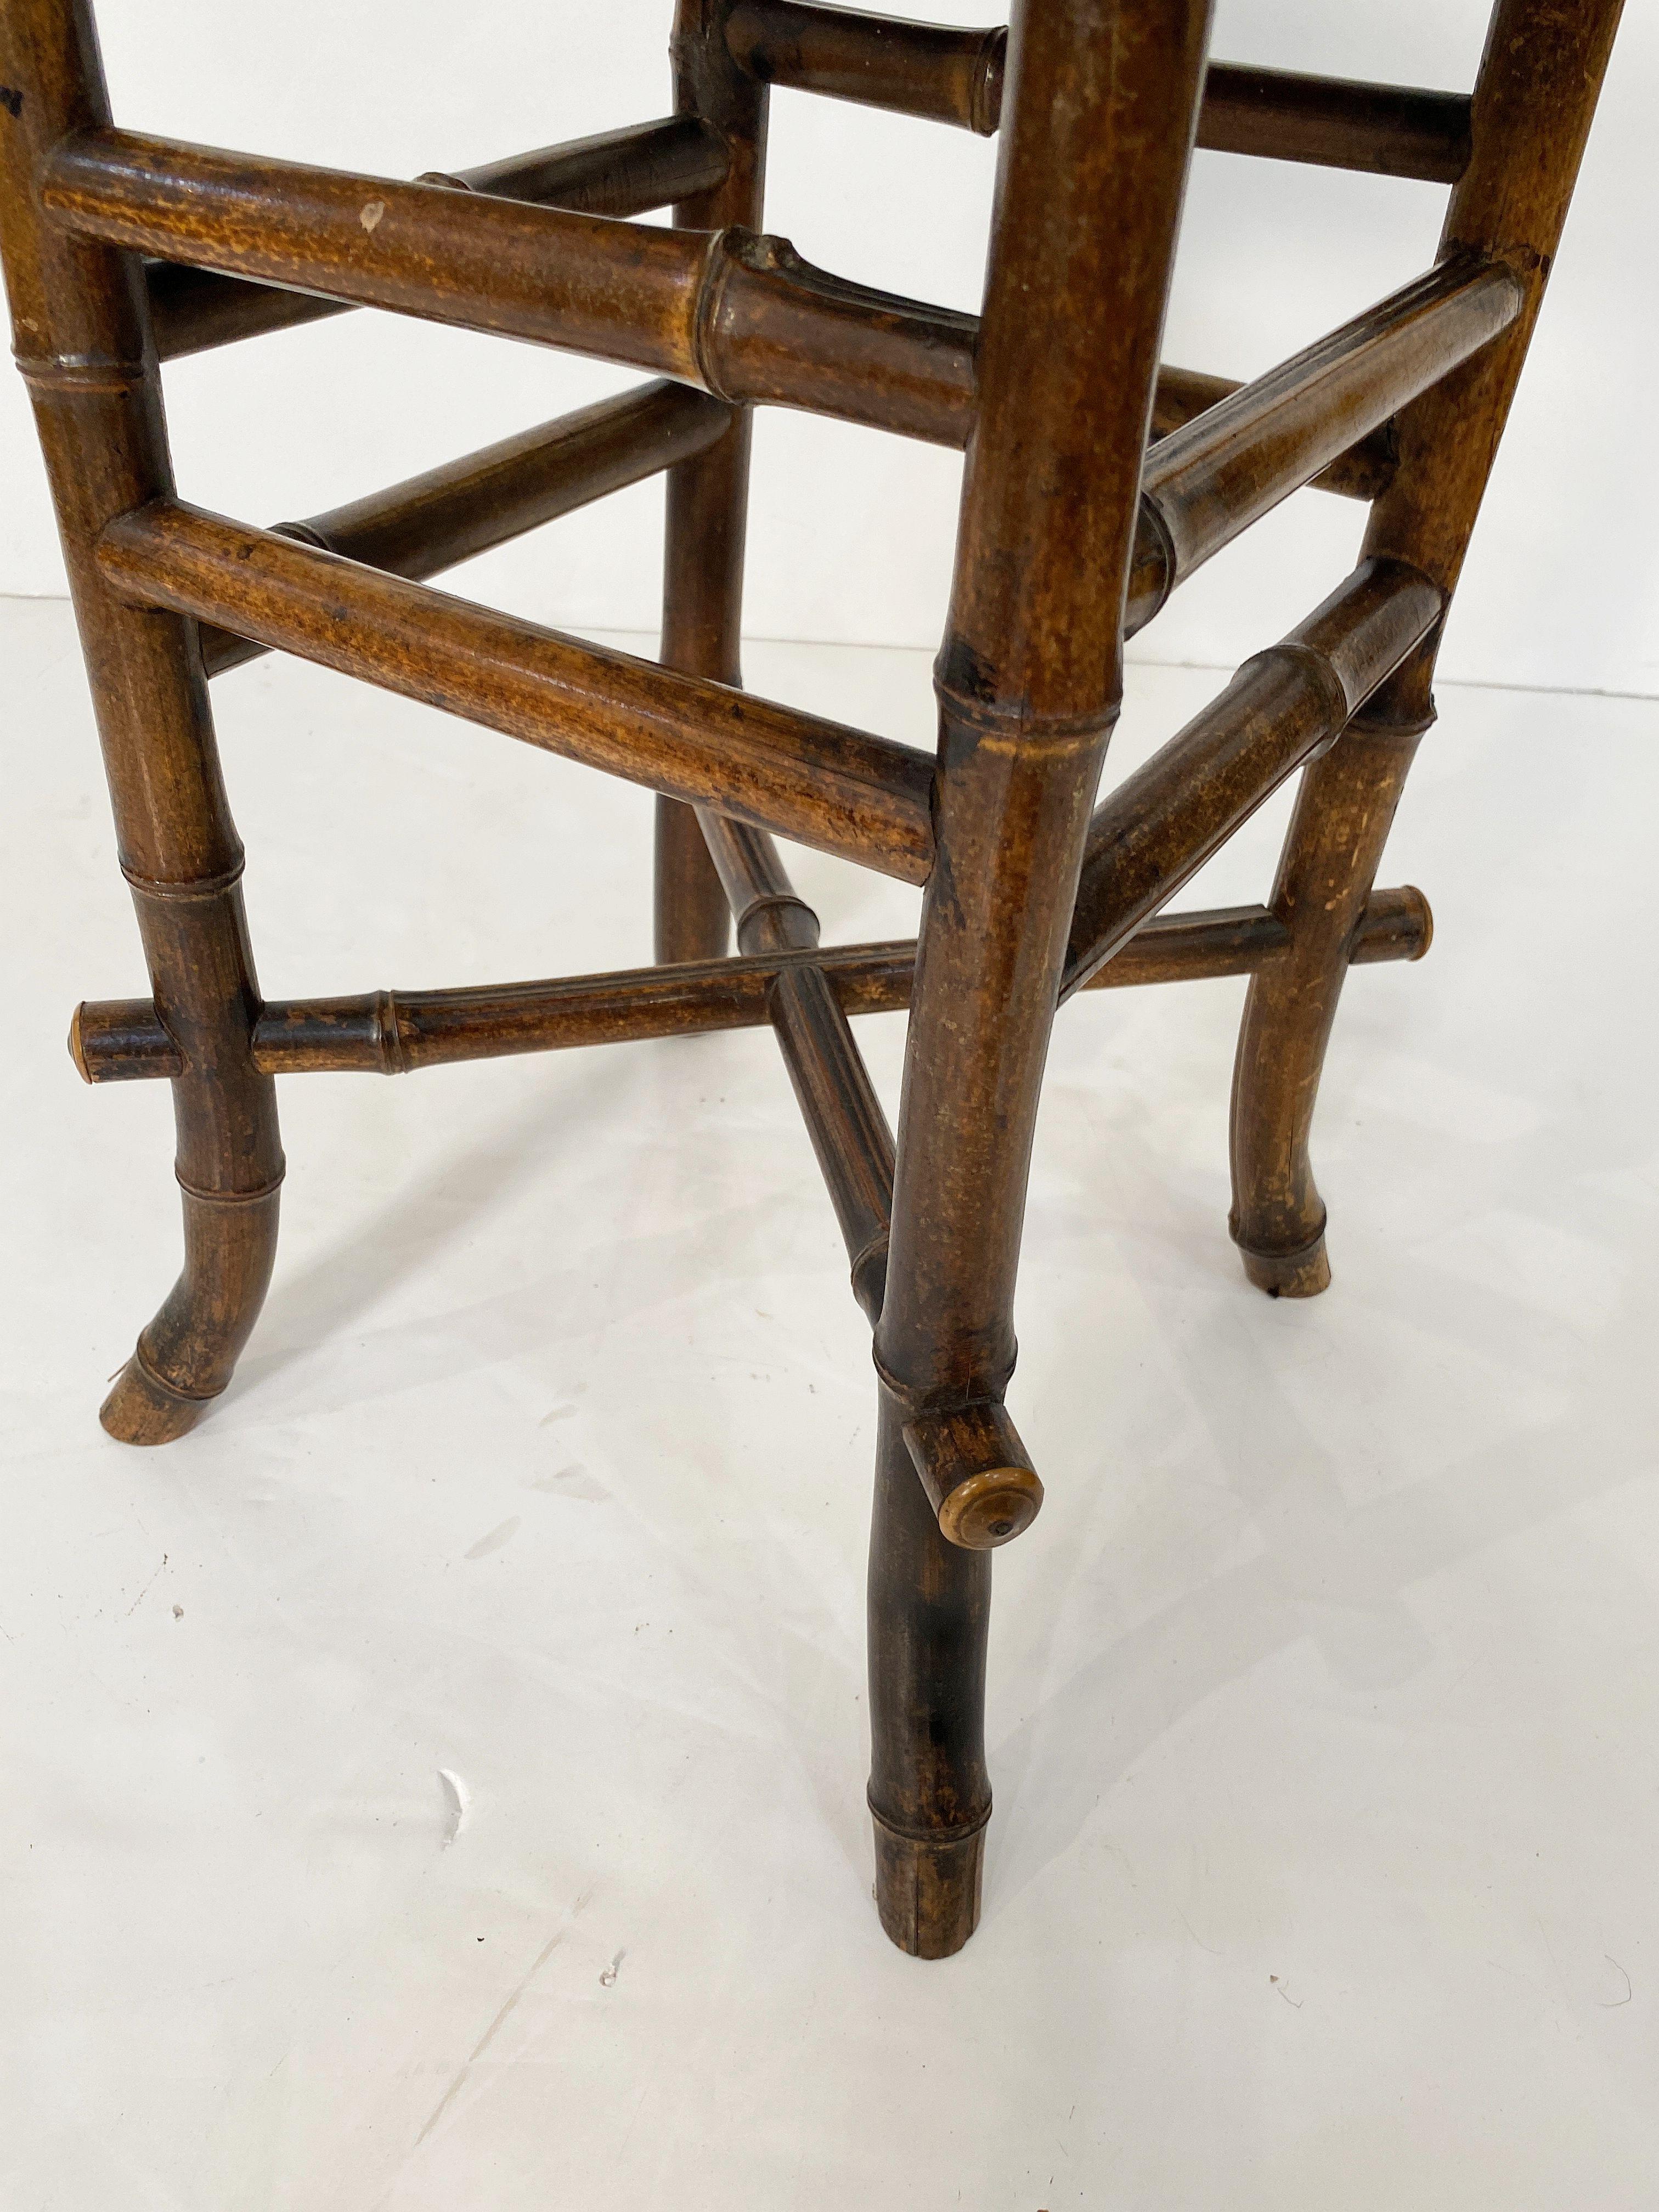 English Bamboo Table or Stool with Tile Seat from the Aesthetic Movement Era For Sale 8